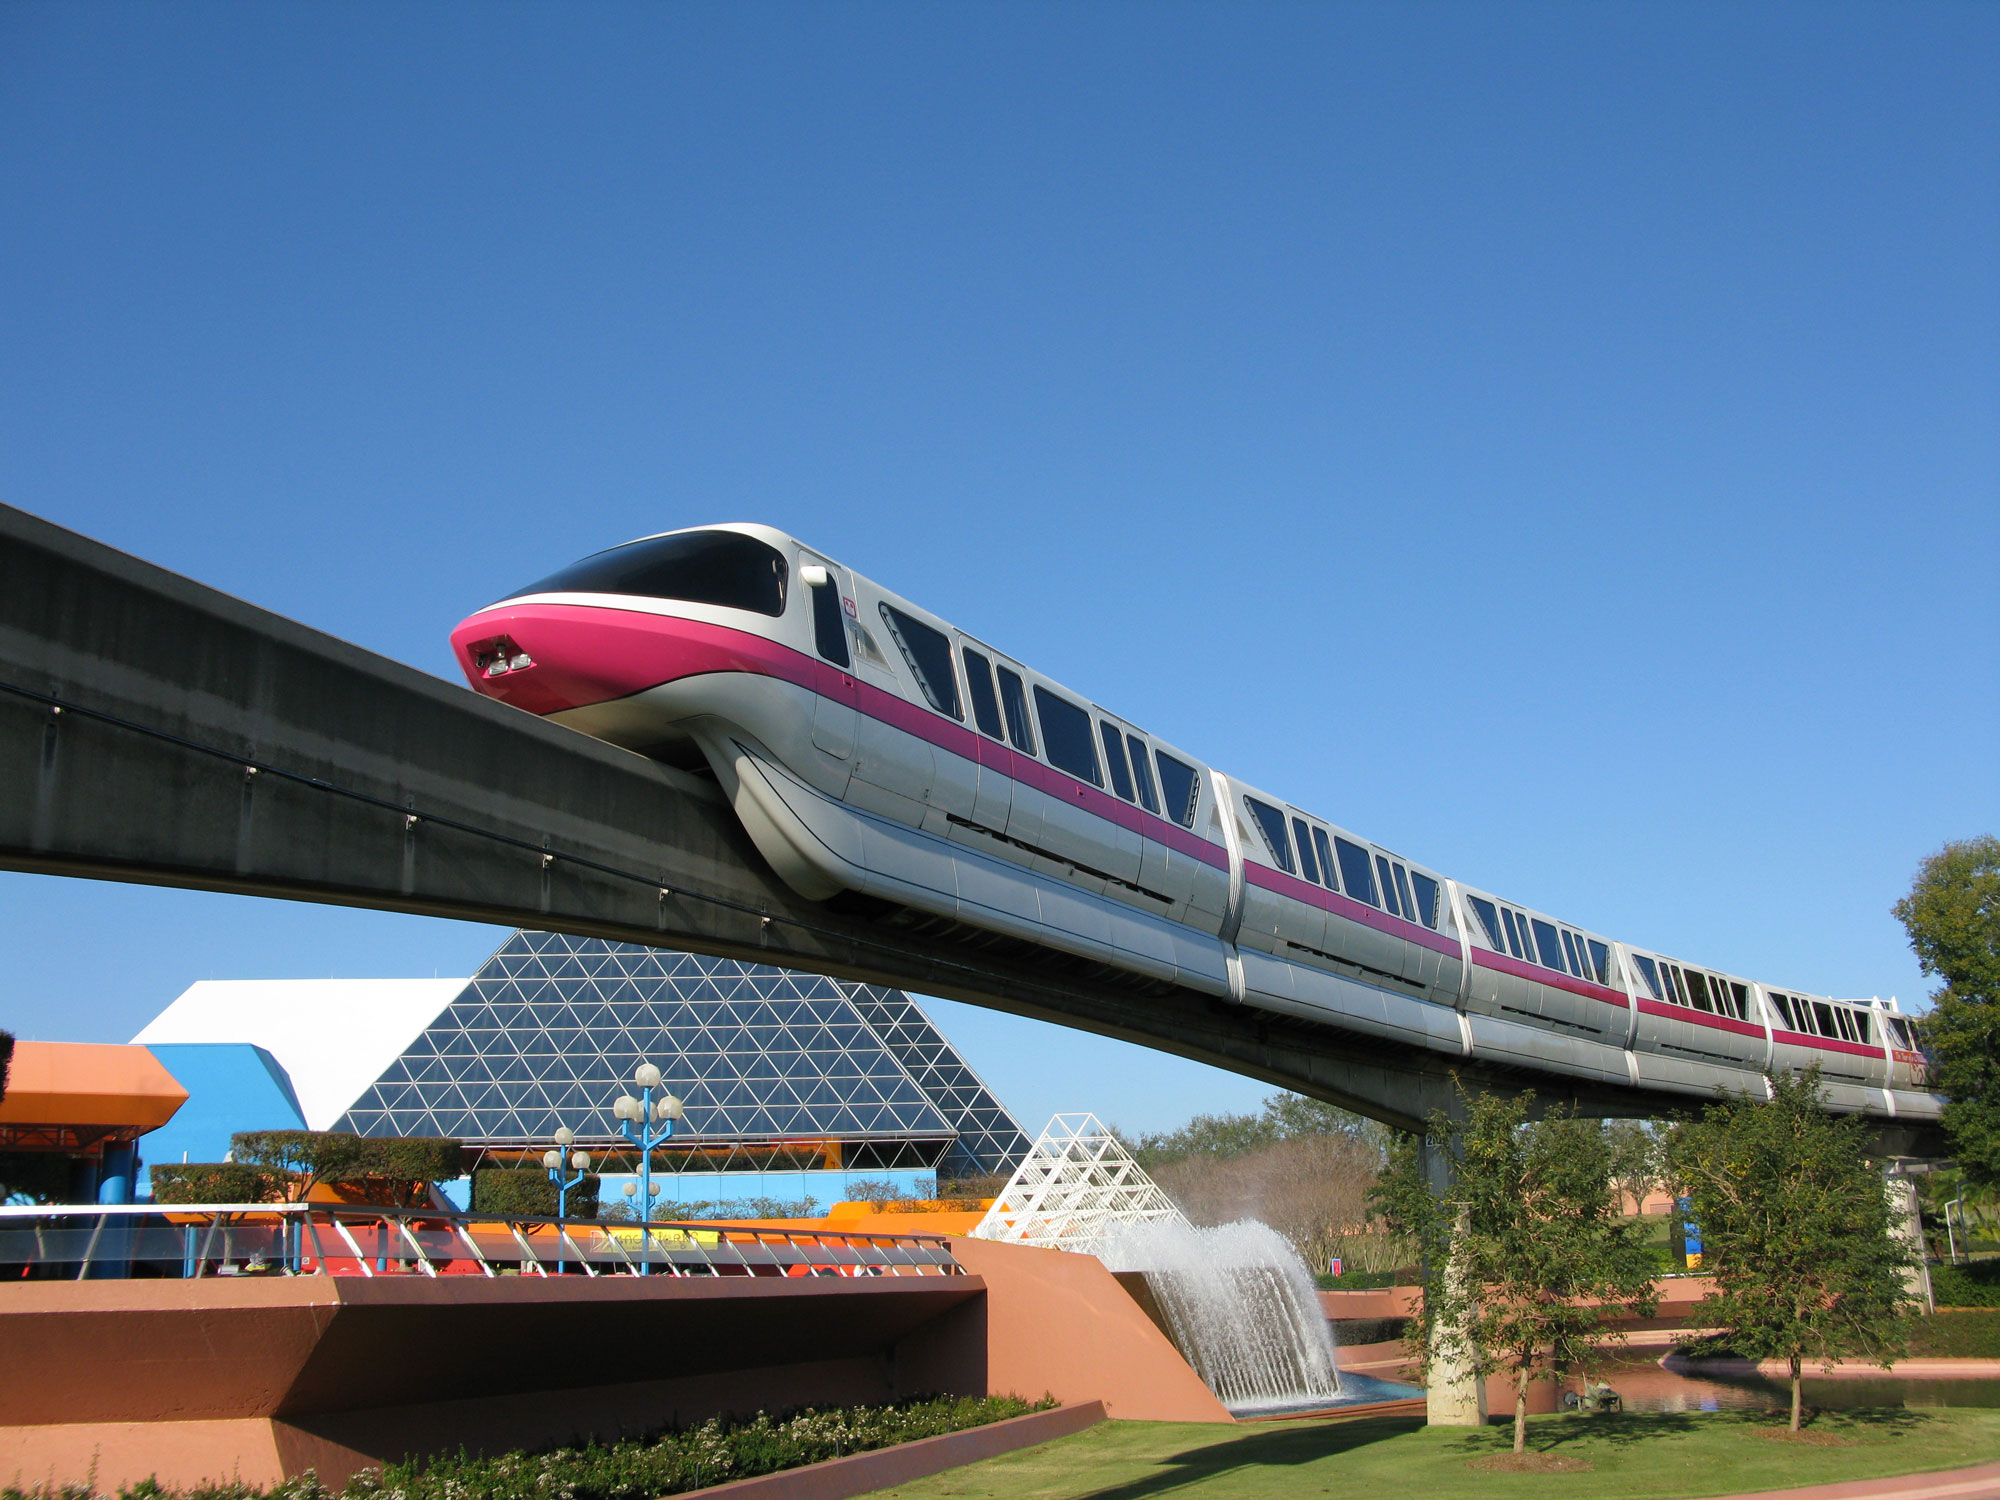 Epcot - Imagination Pavilion with Pink Monorail